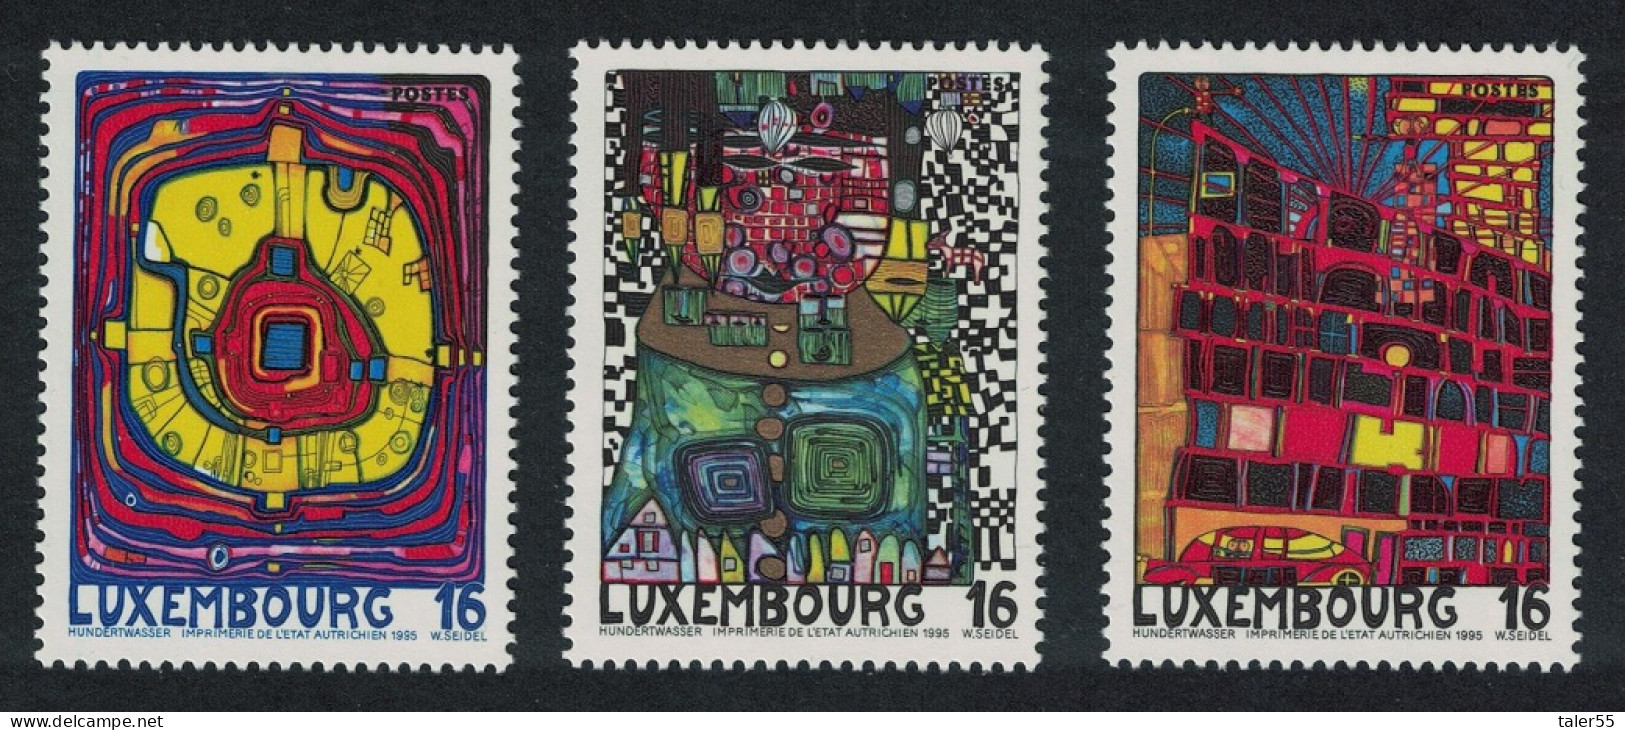 Luxembourg European City Of Culture 3v 1995 MNH SG#1387-1389 MI#1360-1362 - Unused Stamps